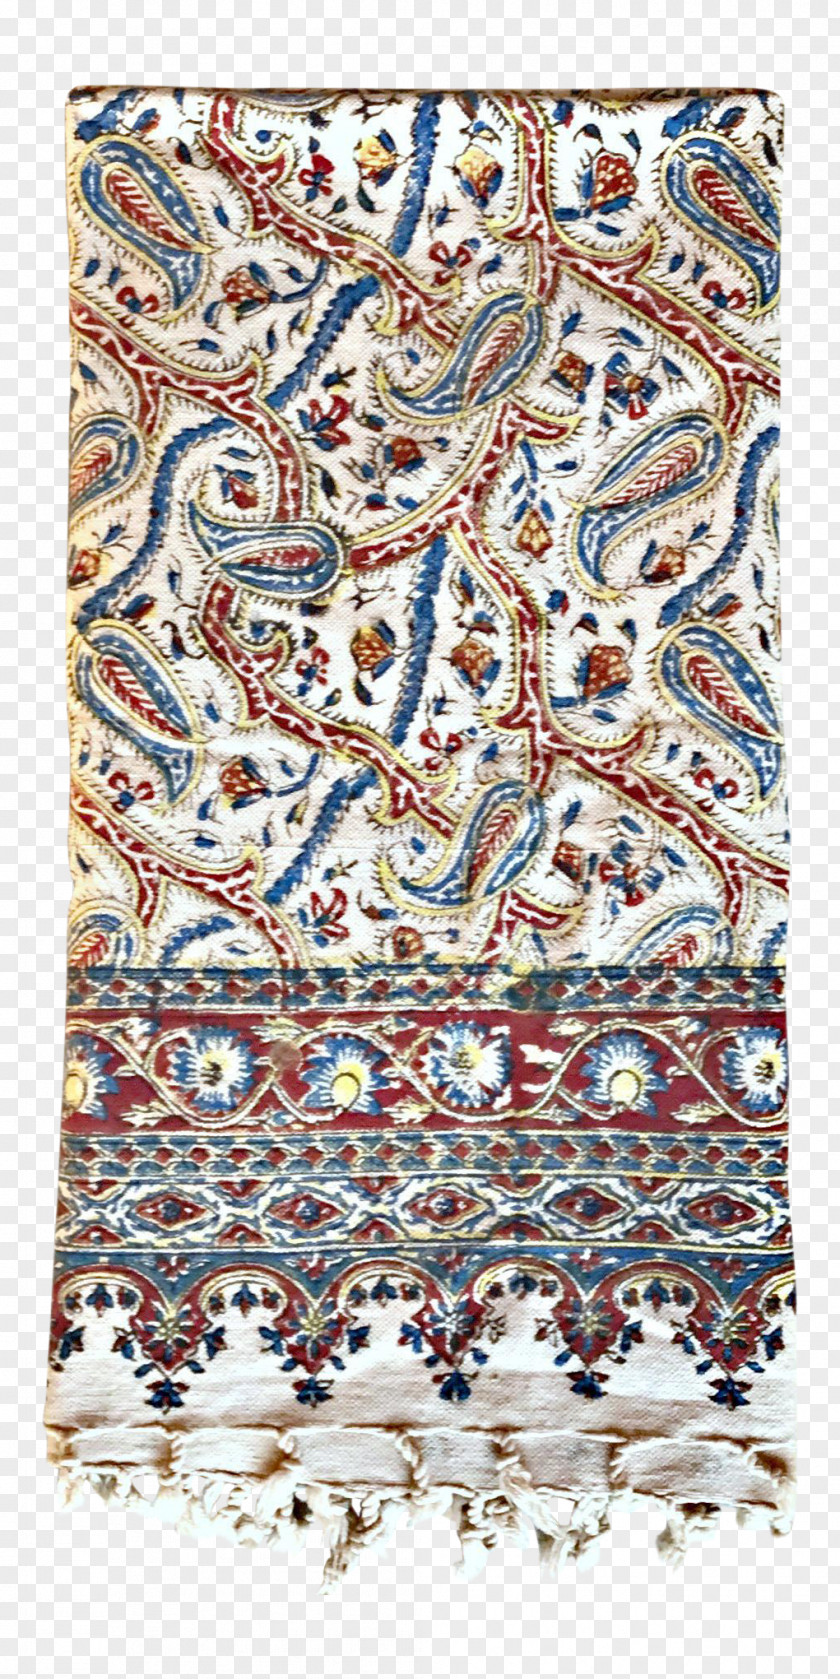 Paisley Textile Chairish Islamic Rugs Antique Art PNG